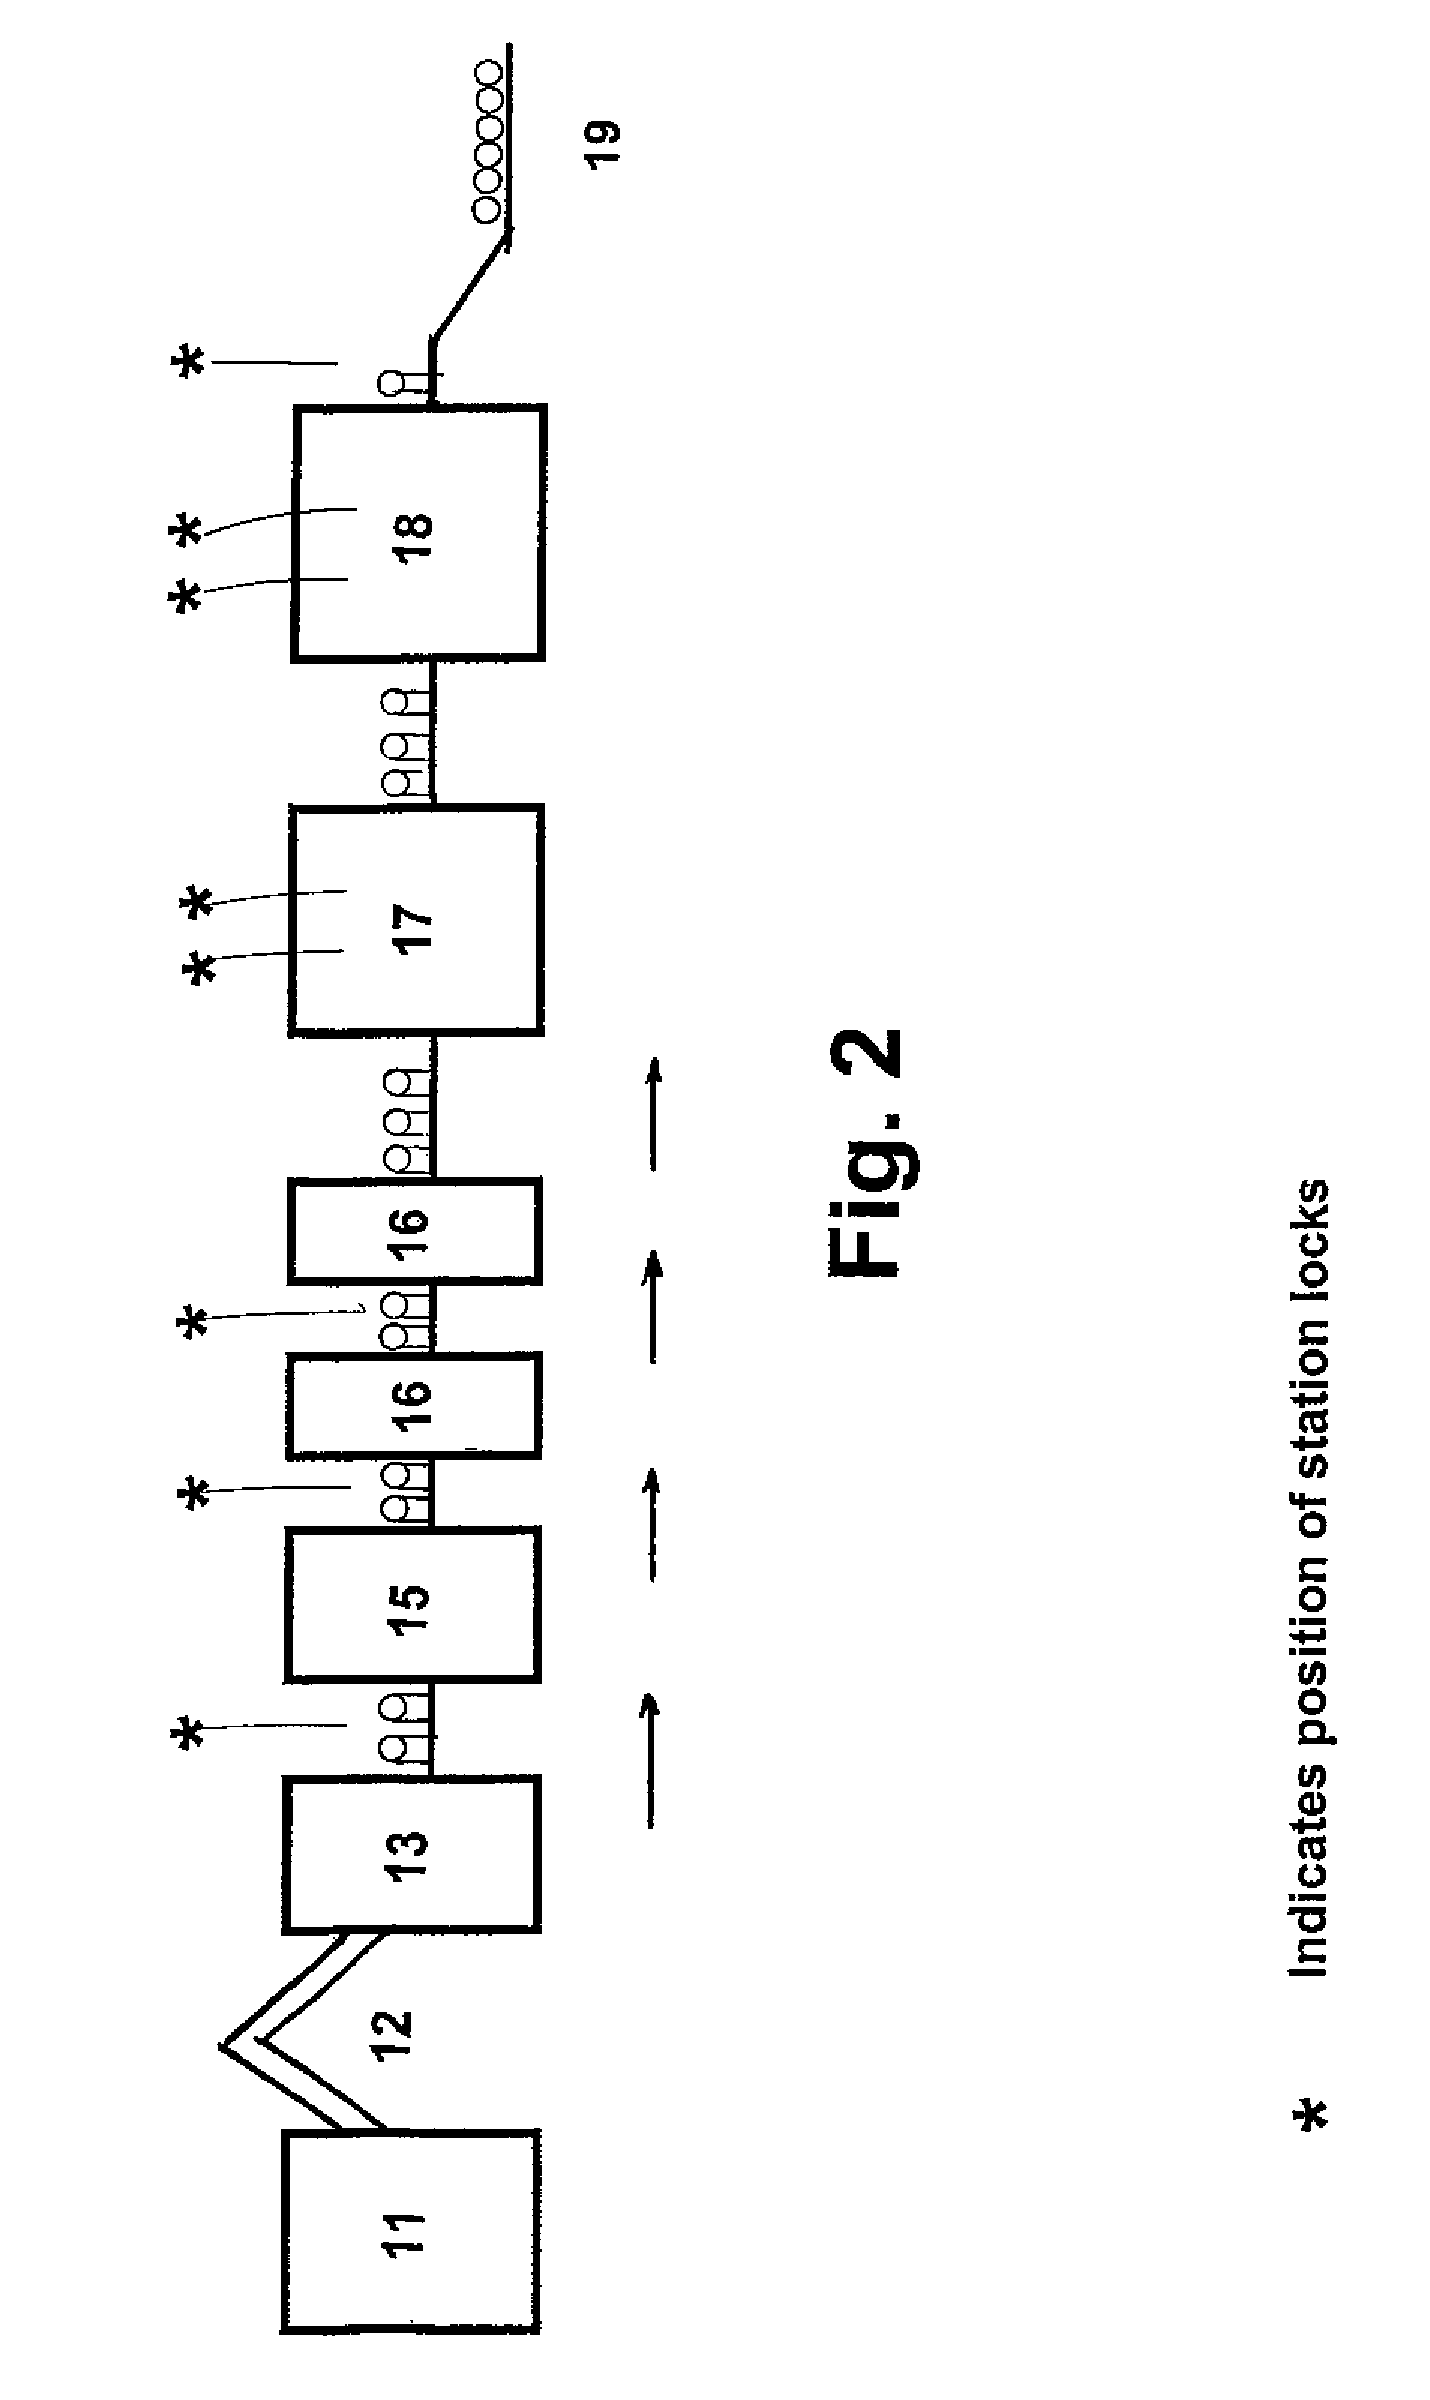 Device for automatic indexing of a golf ball